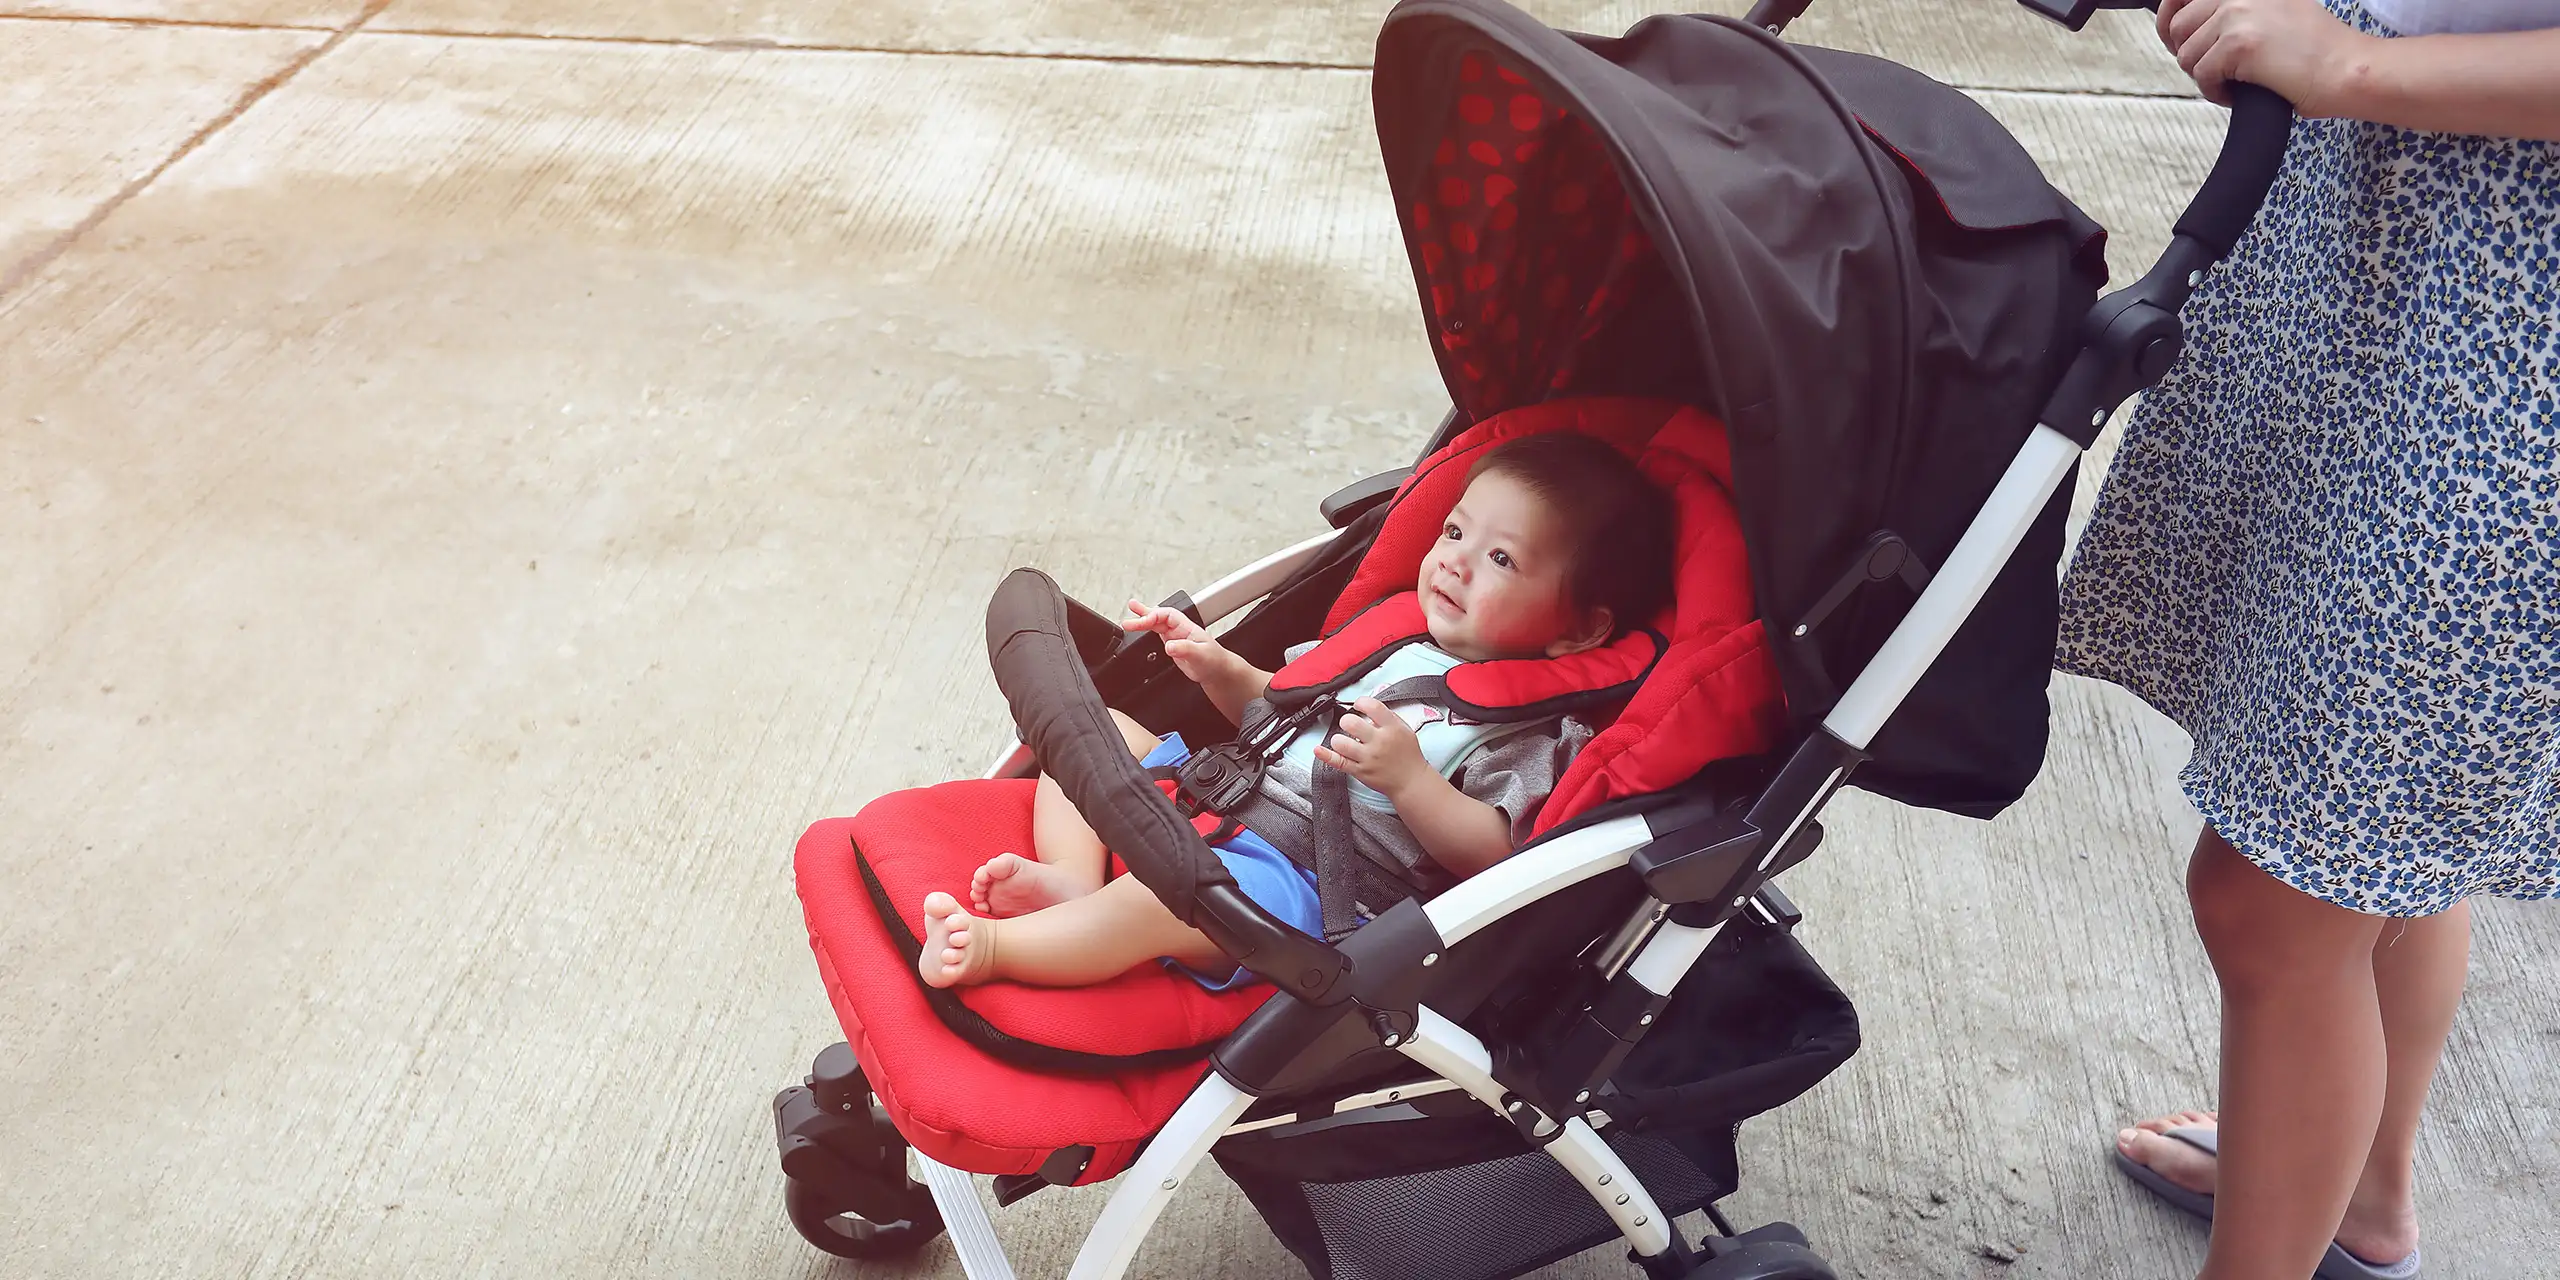 mom in a red stroller; Courtesy of Shutterstock